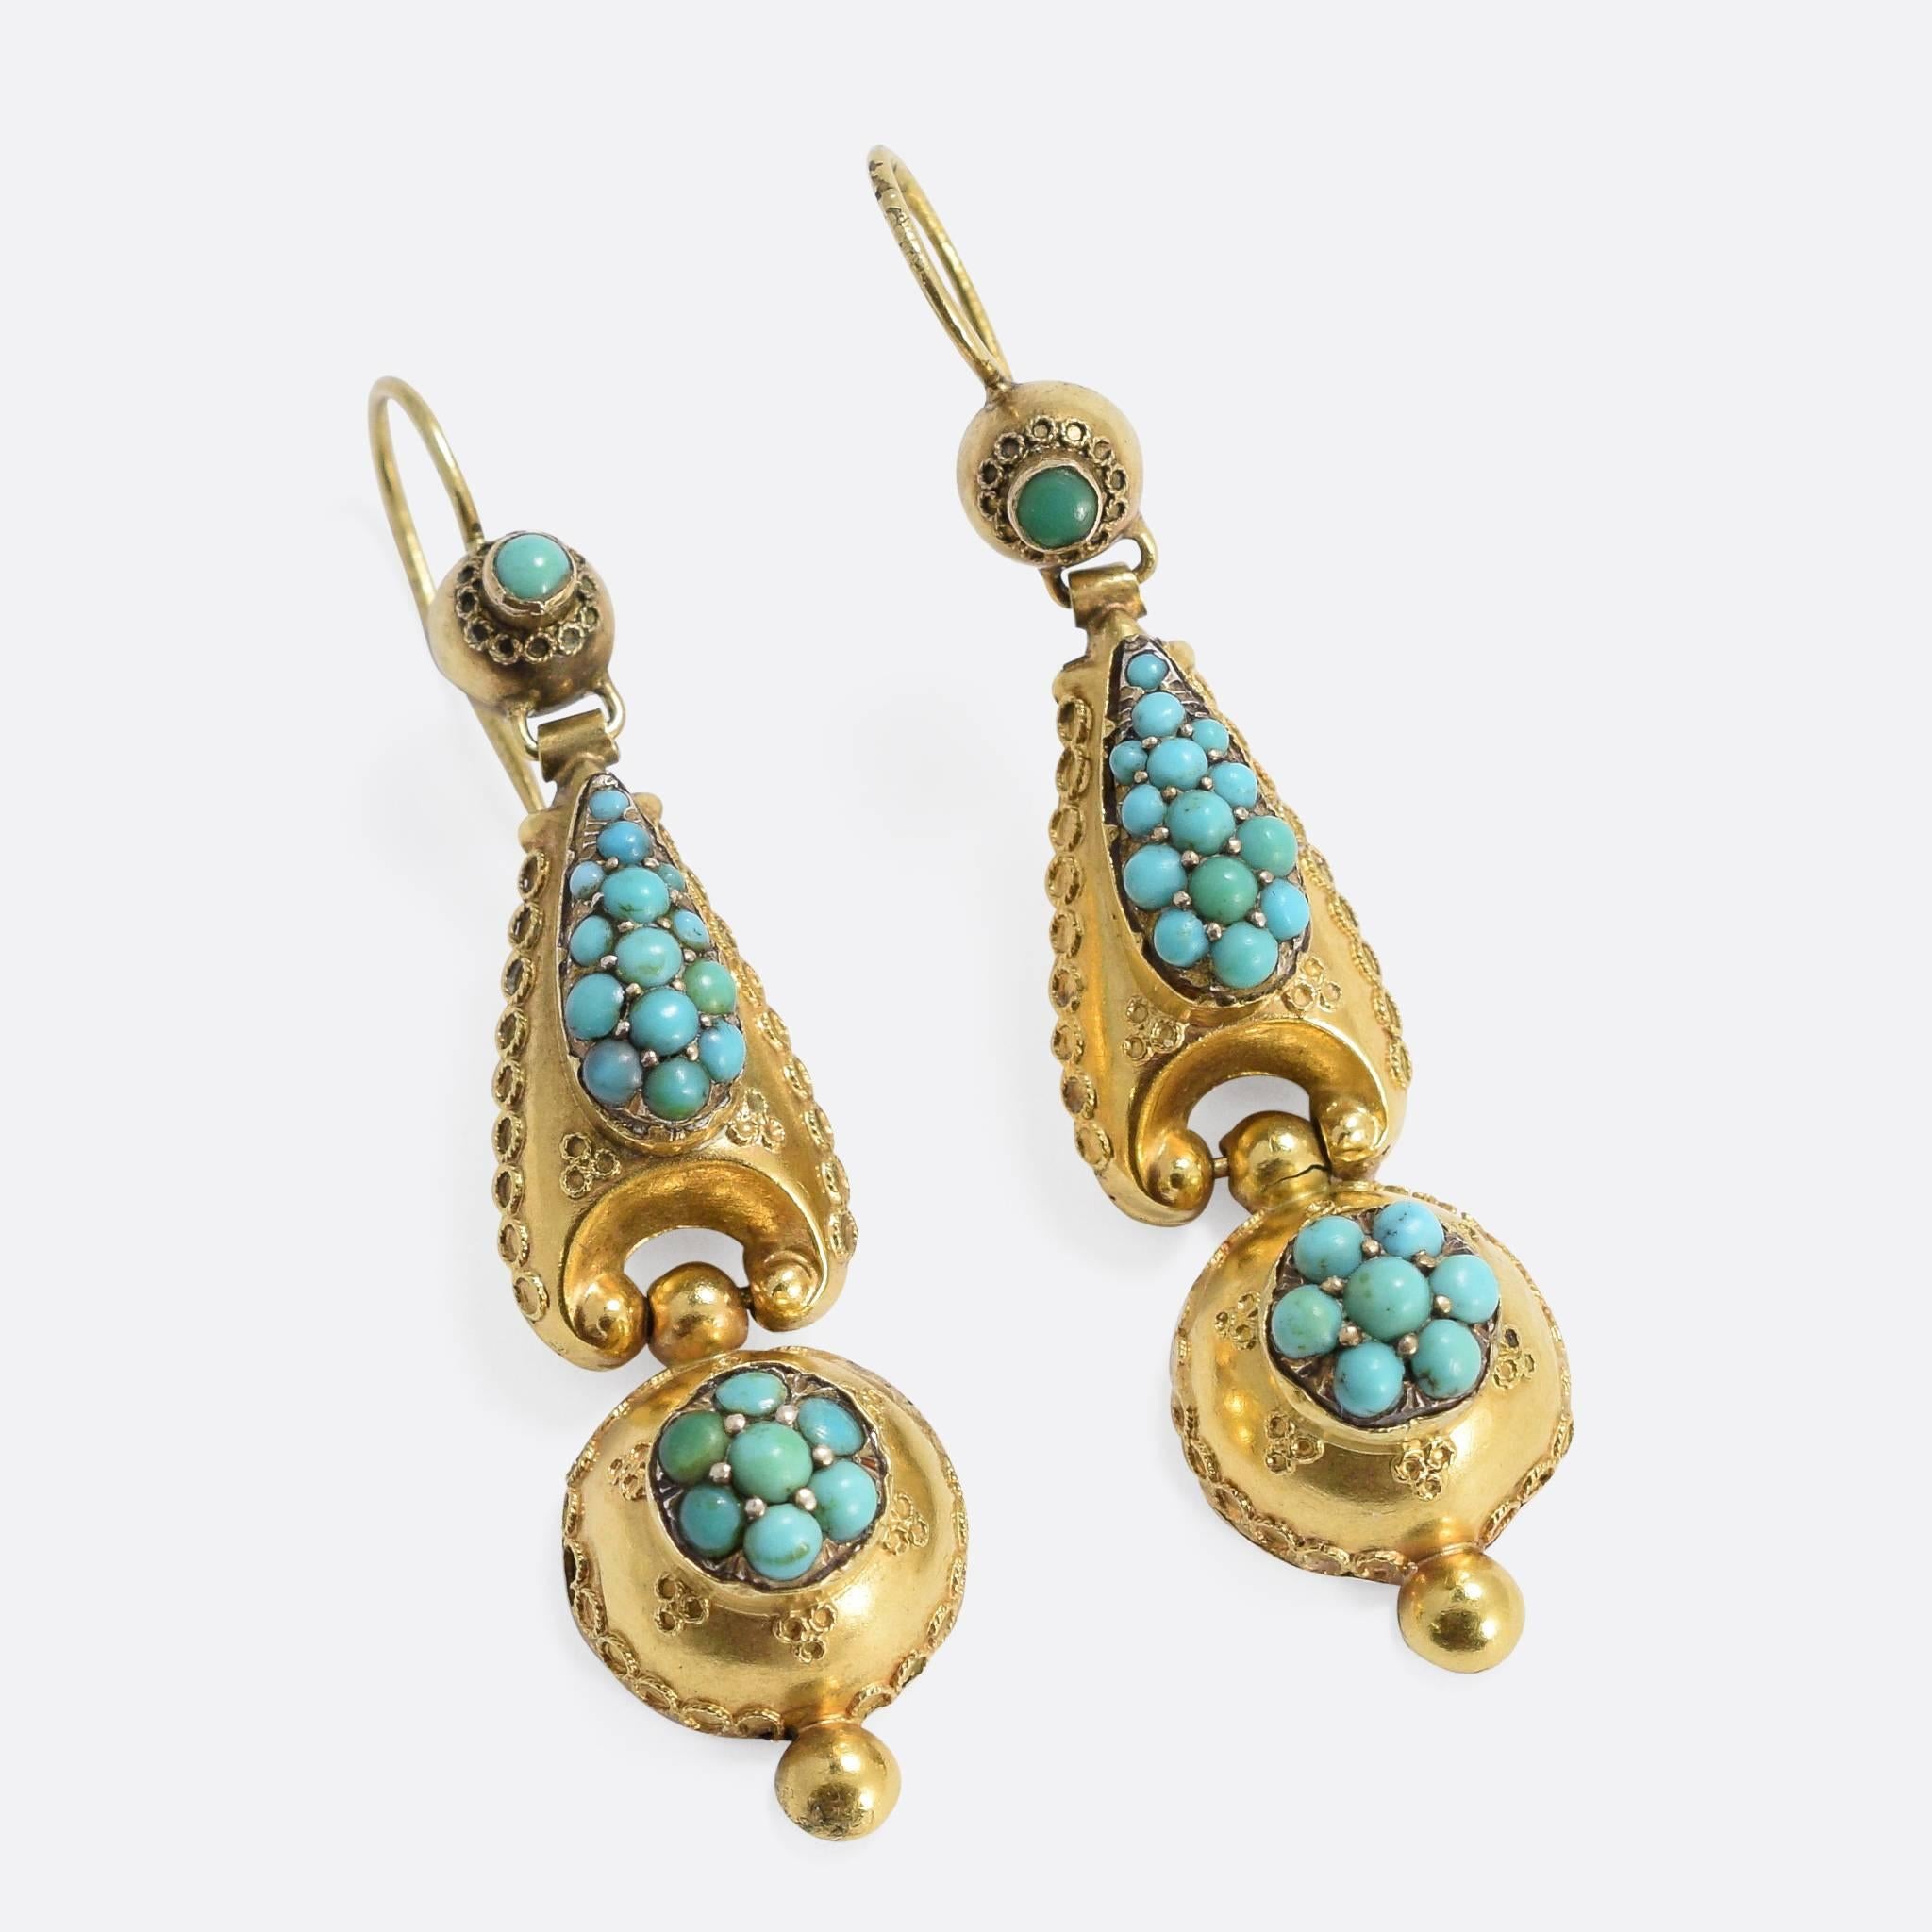 A beautiful pair of antique long drop earrings, modelled in 15k gold with applied rope work detailing in the Etruscan style. Two clusters adorn the main body and the drop respectively. The Etruscan Revival movement was influenced by jewellery found